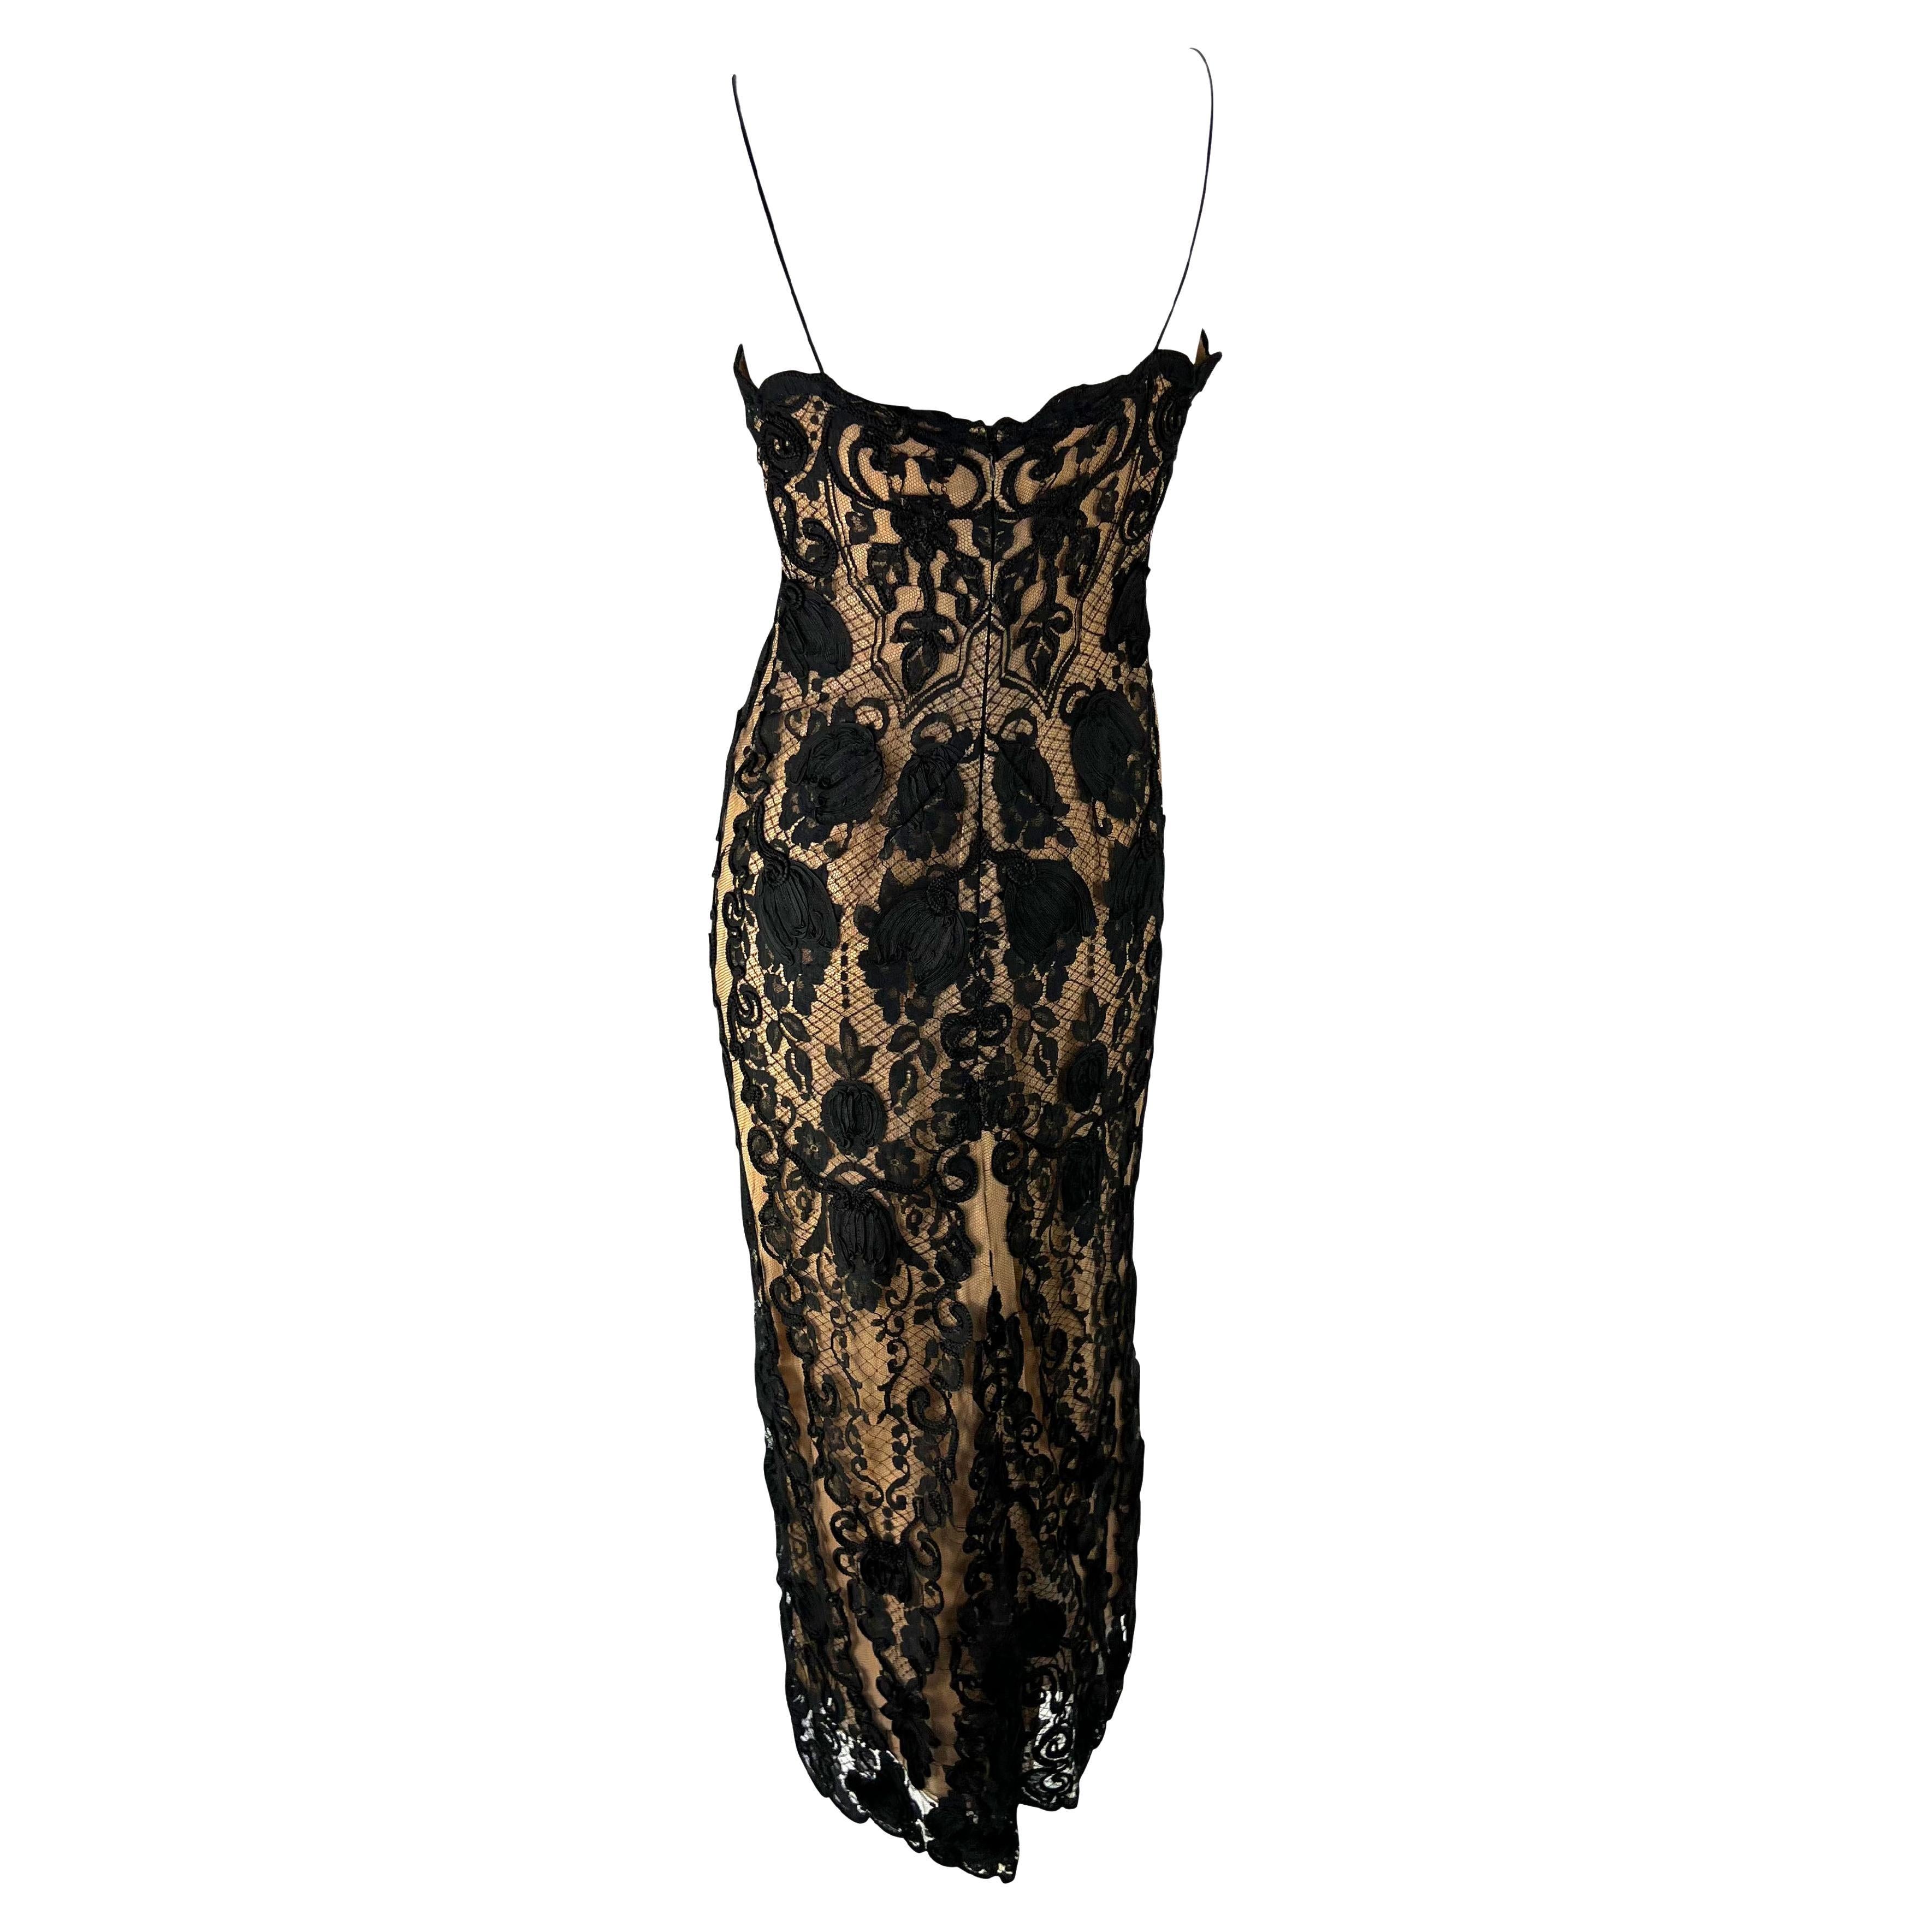 beige dress with black lace overlay